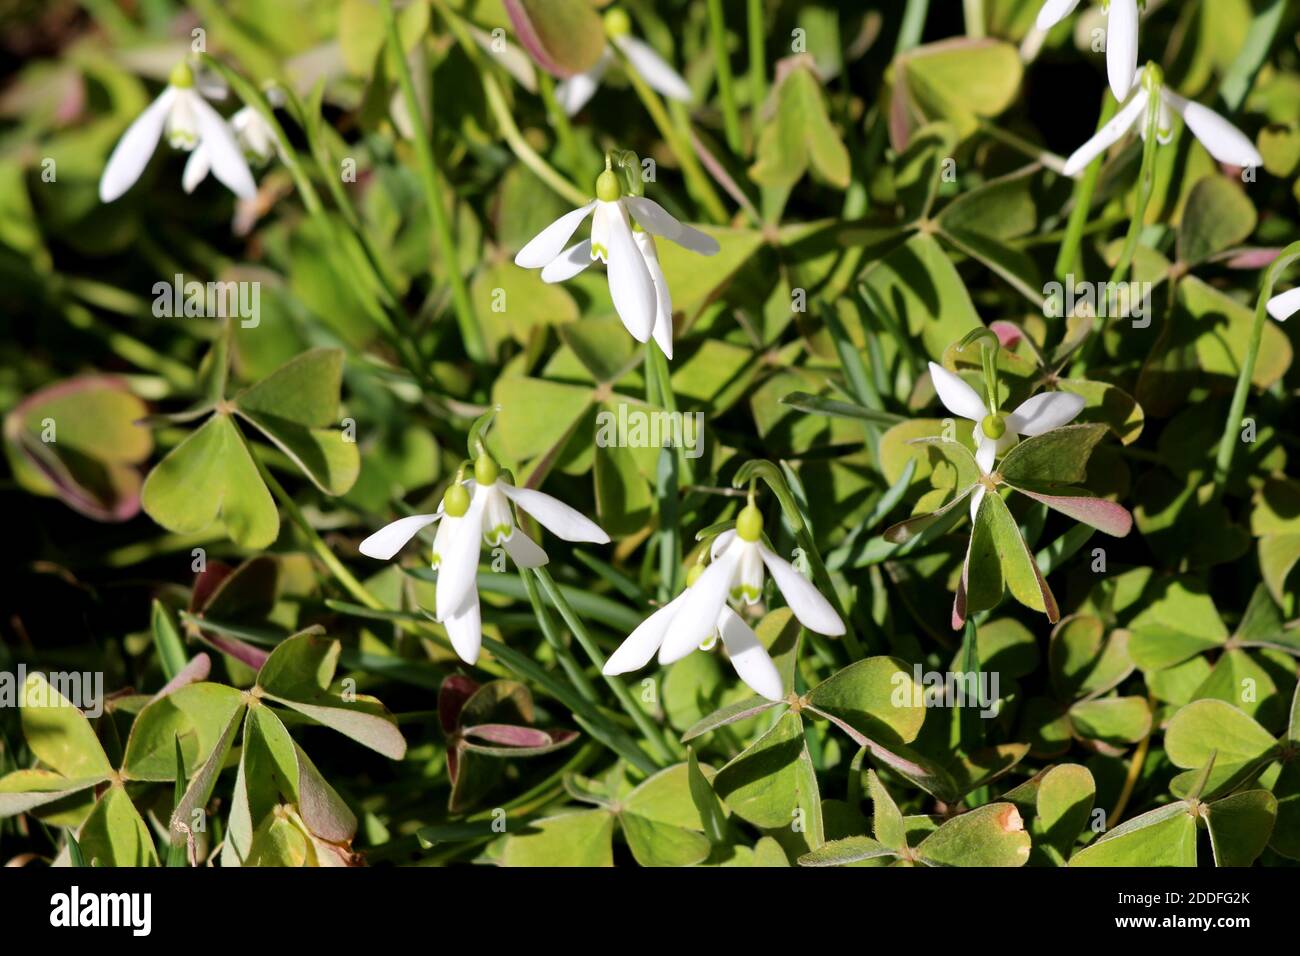 Densely planted Snowdrop or Galanthus bulbous perennial herbaceous plants with two linear leaves and a small white drooping bell shaped flower Stock Photo